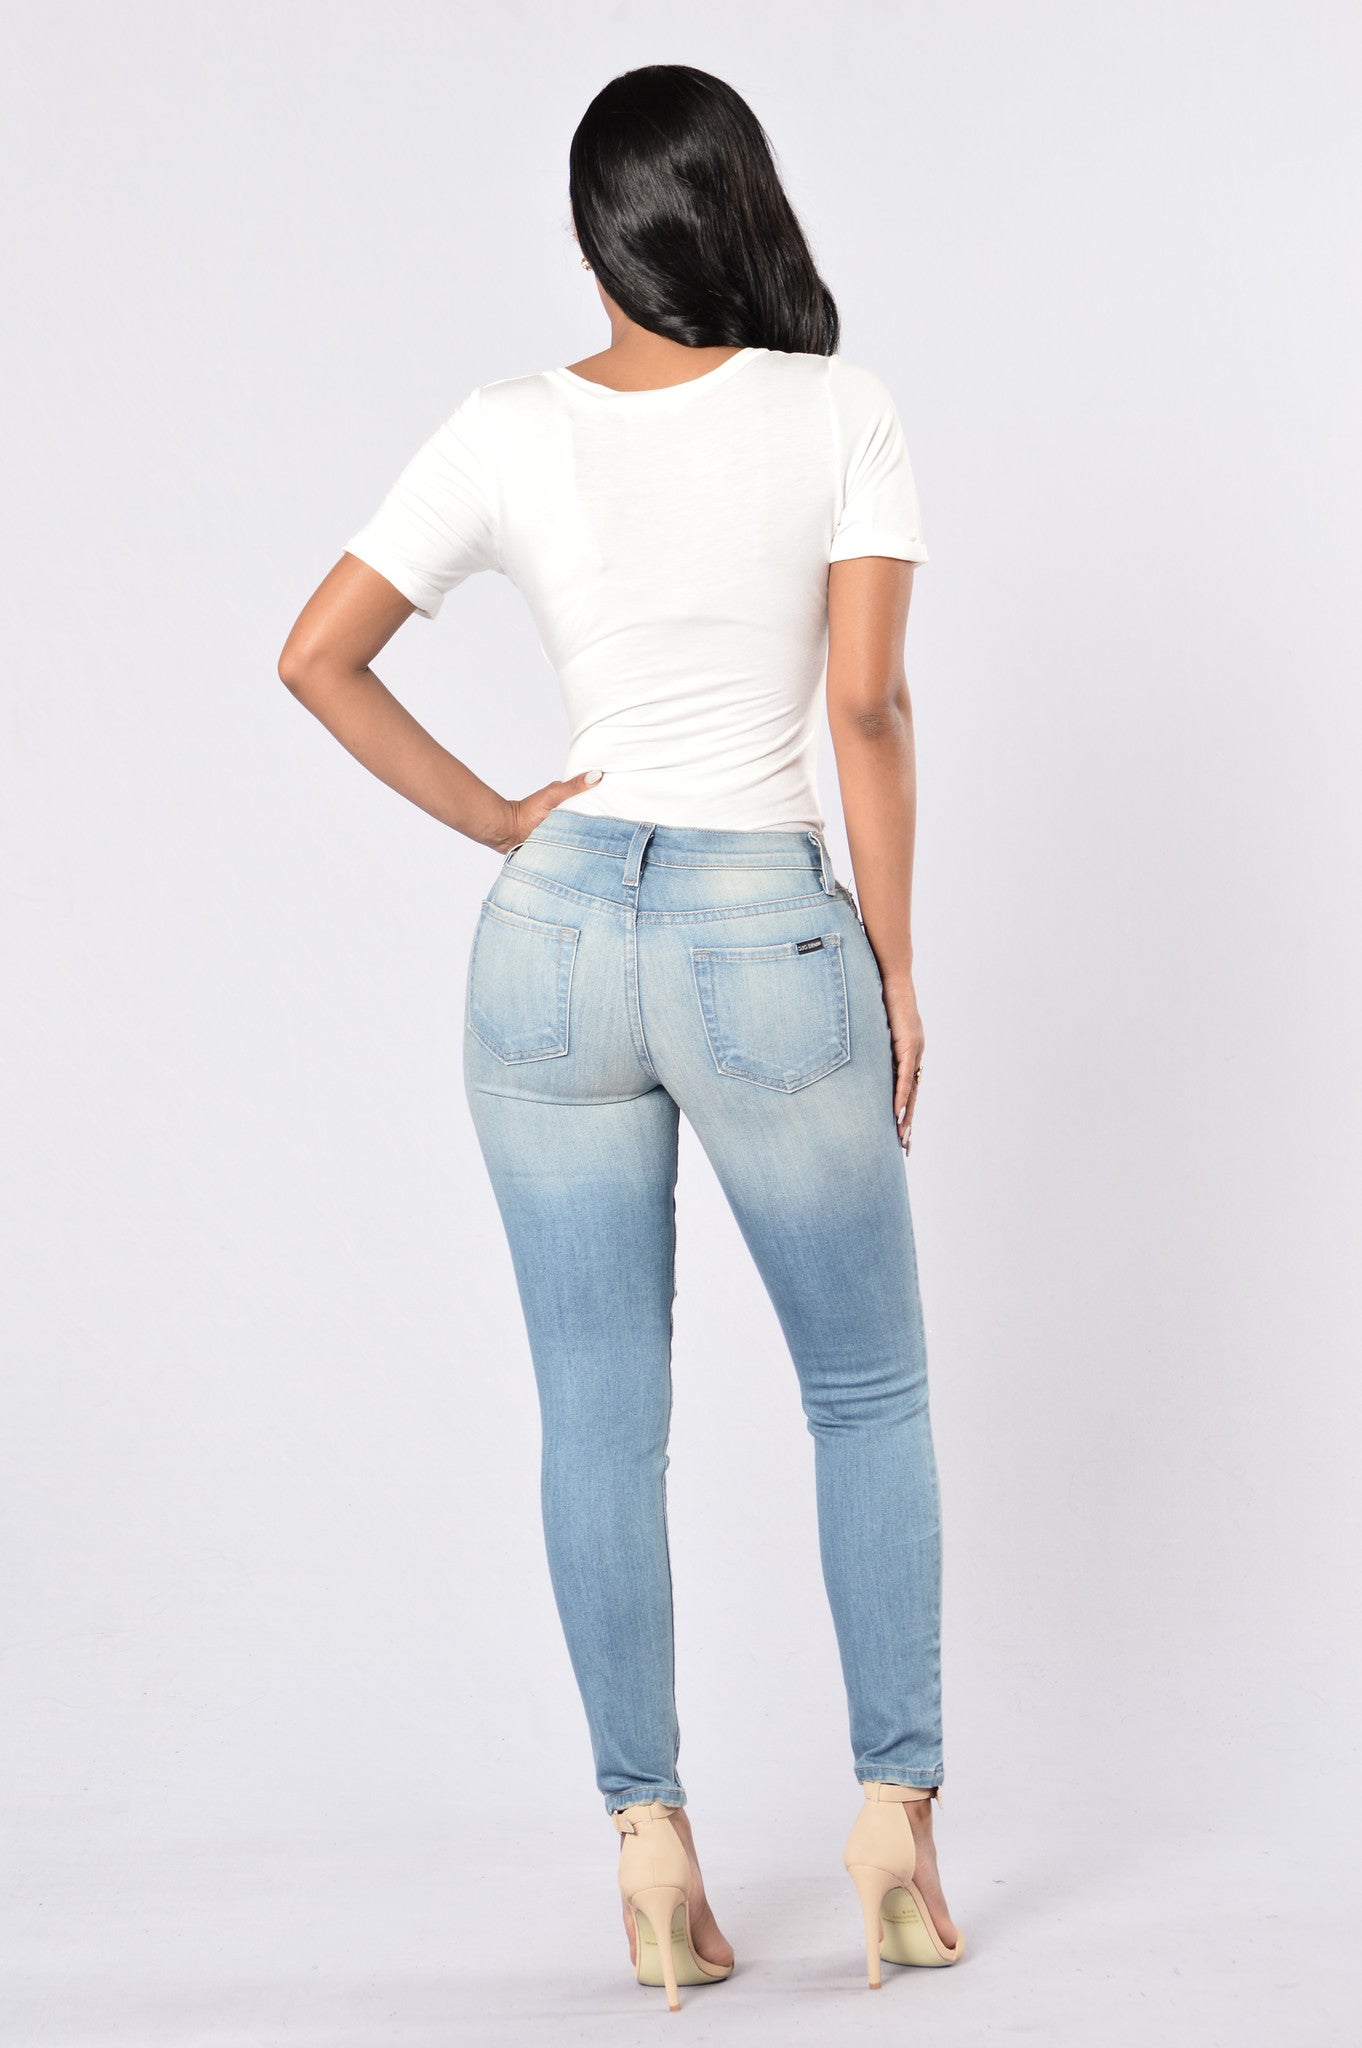 Let's Patch Things Up Jeans - Medium Blue